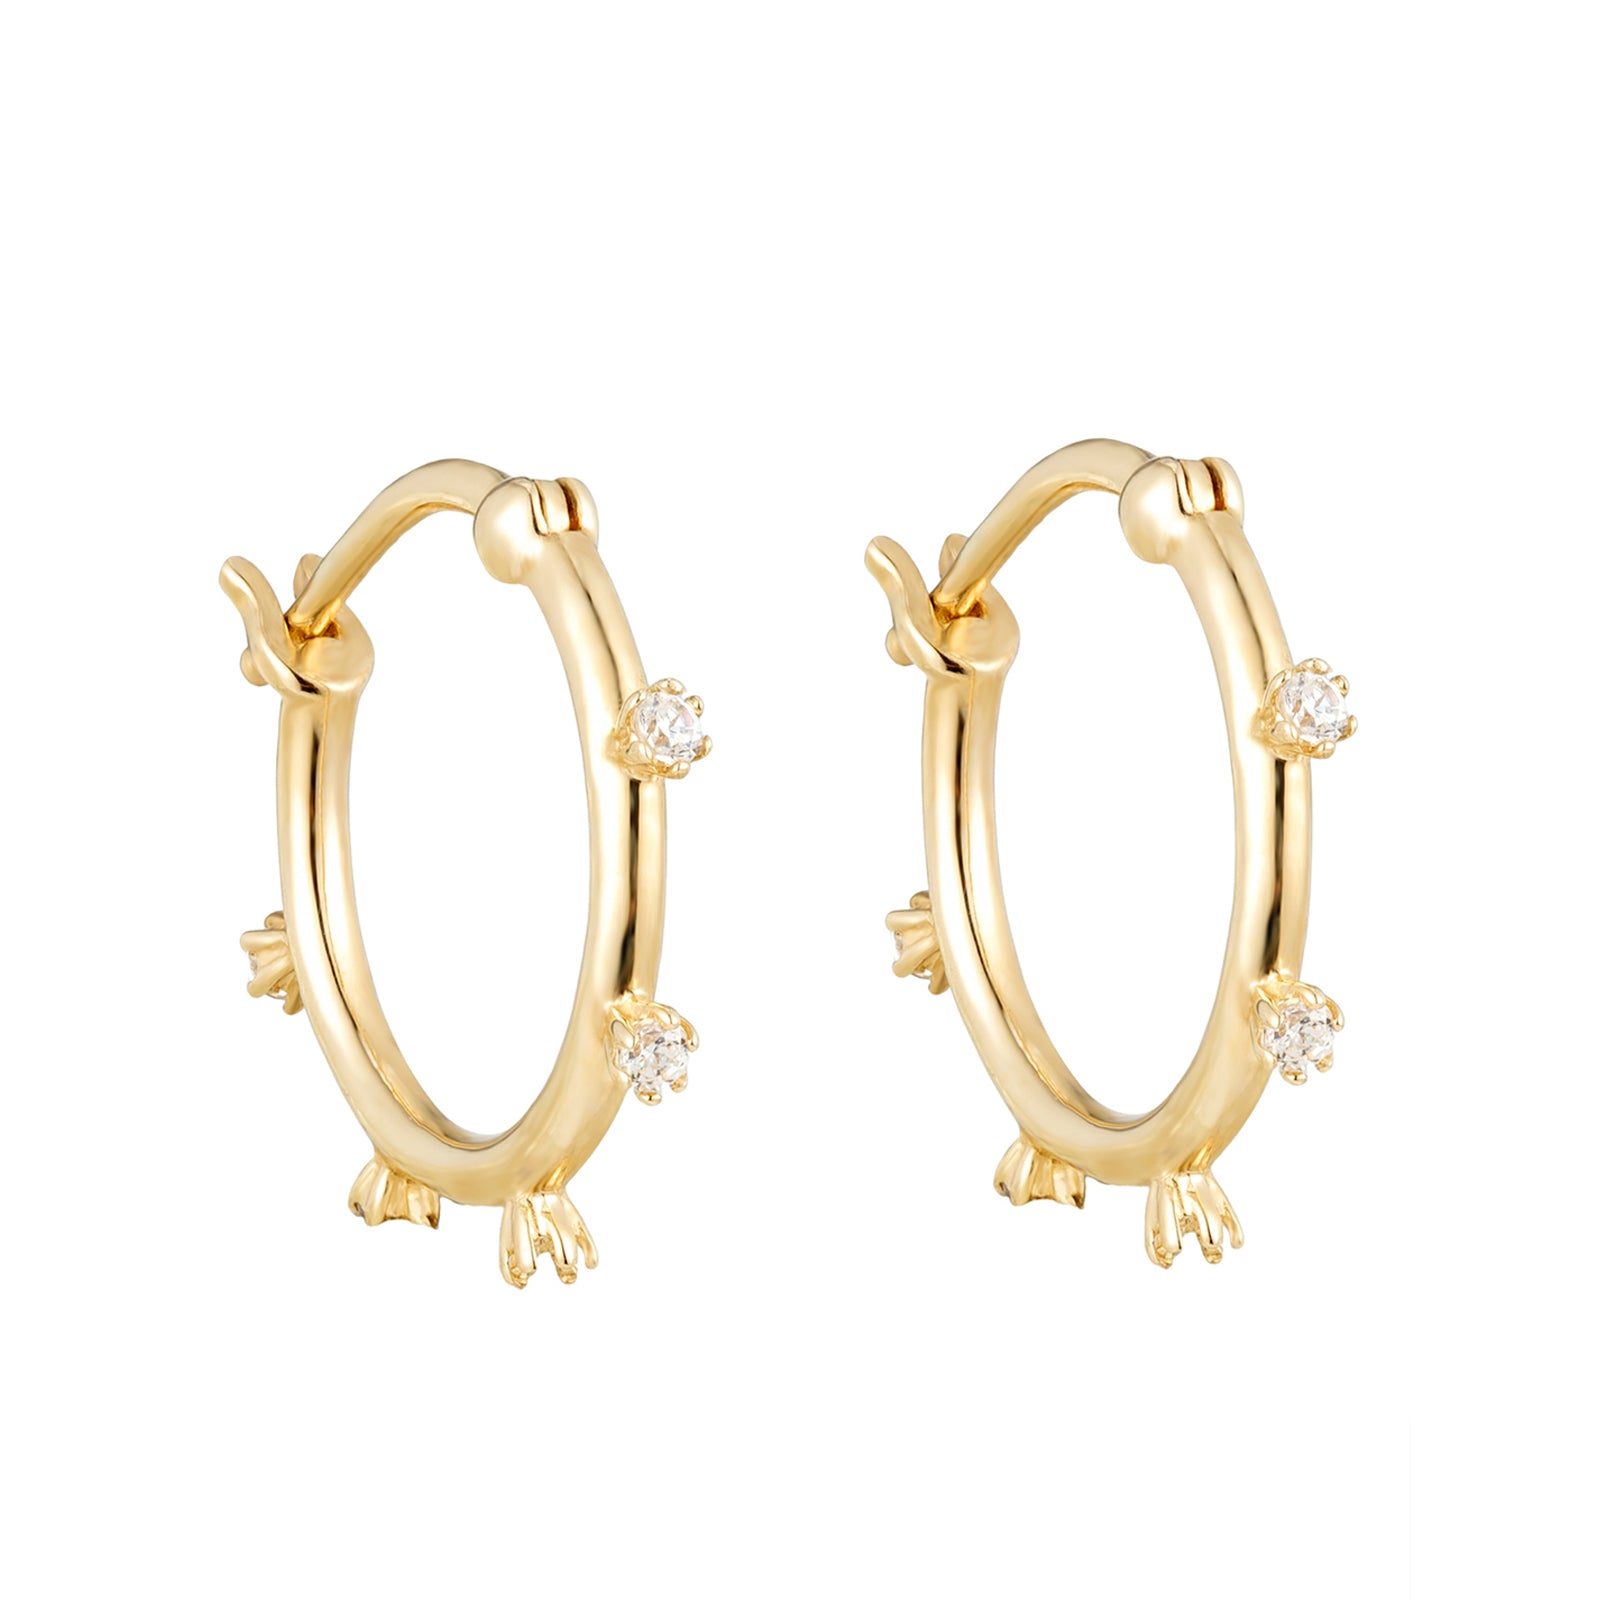 Seol Gold - 9ct Solid Gold CZ Hoops